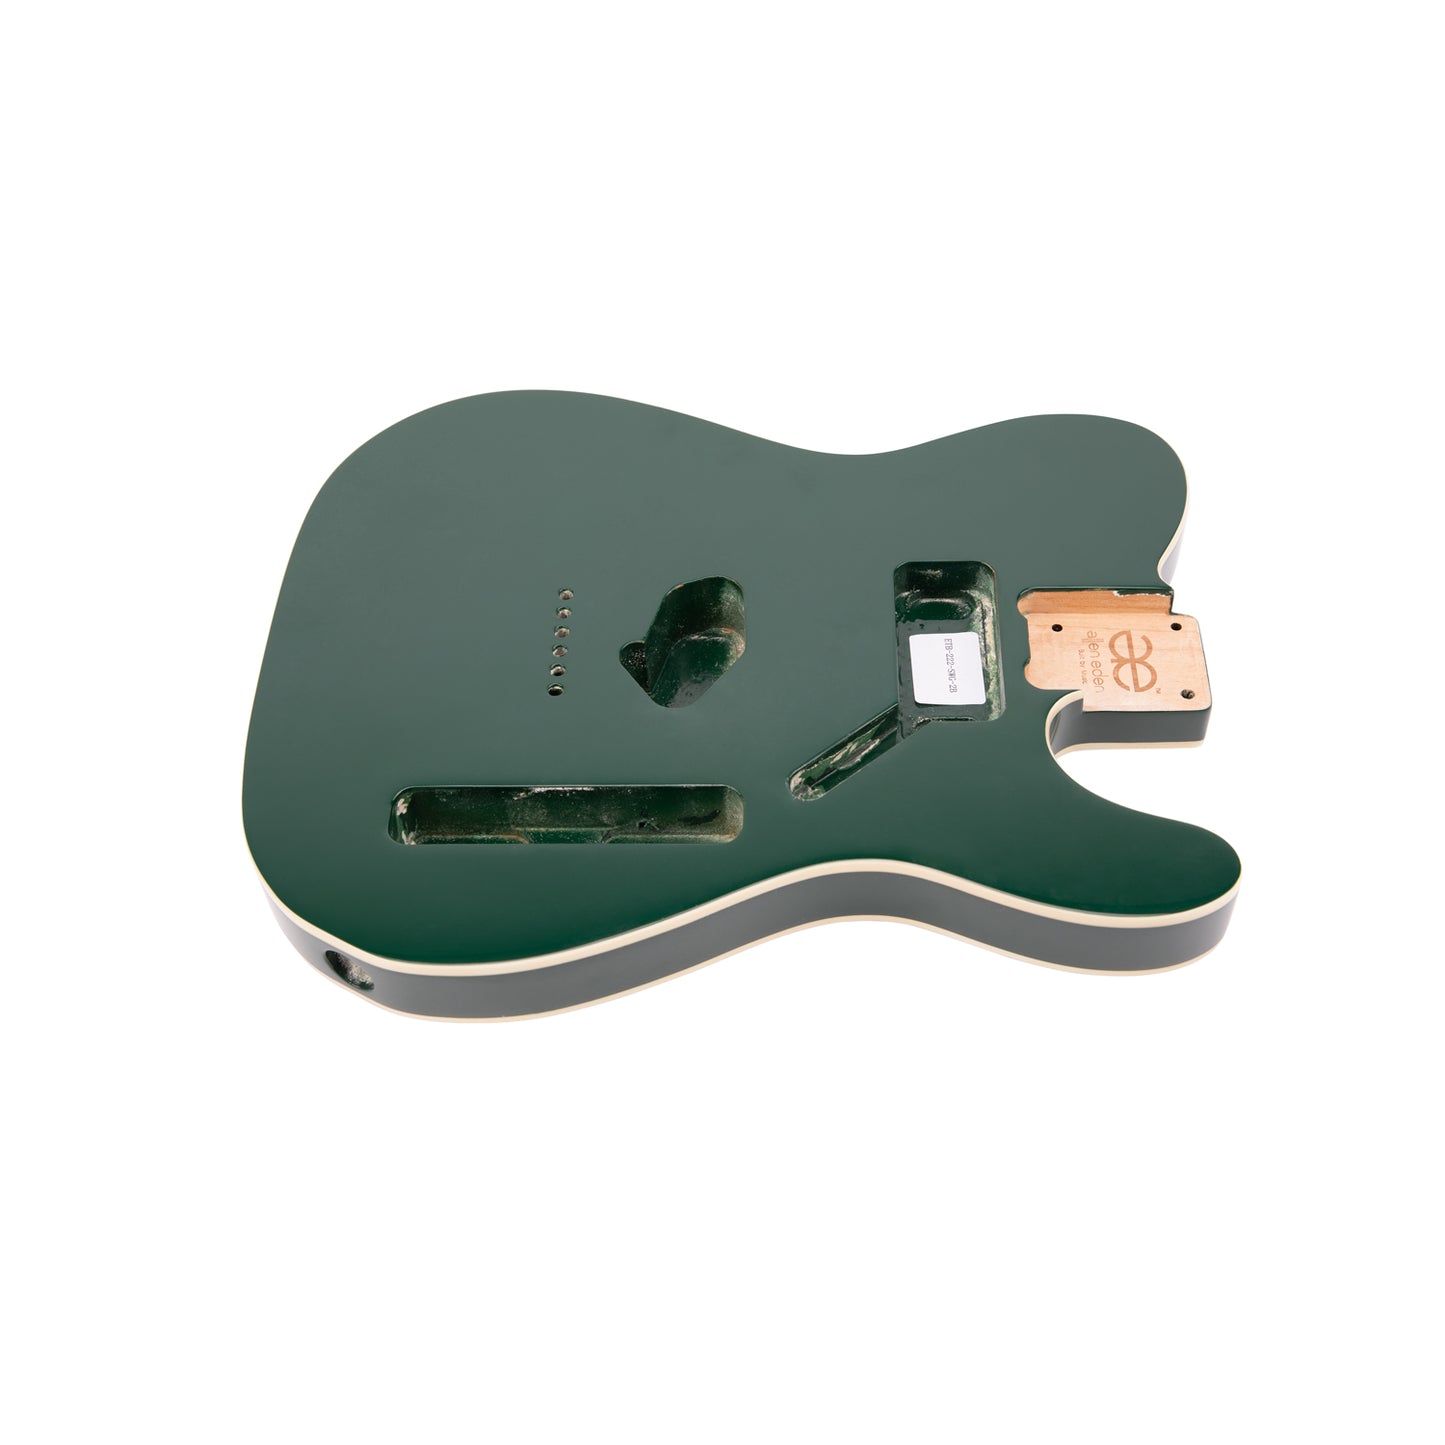 AE Guitars® T-Style Alder Replacement Guitar Body British Race Green with Binding